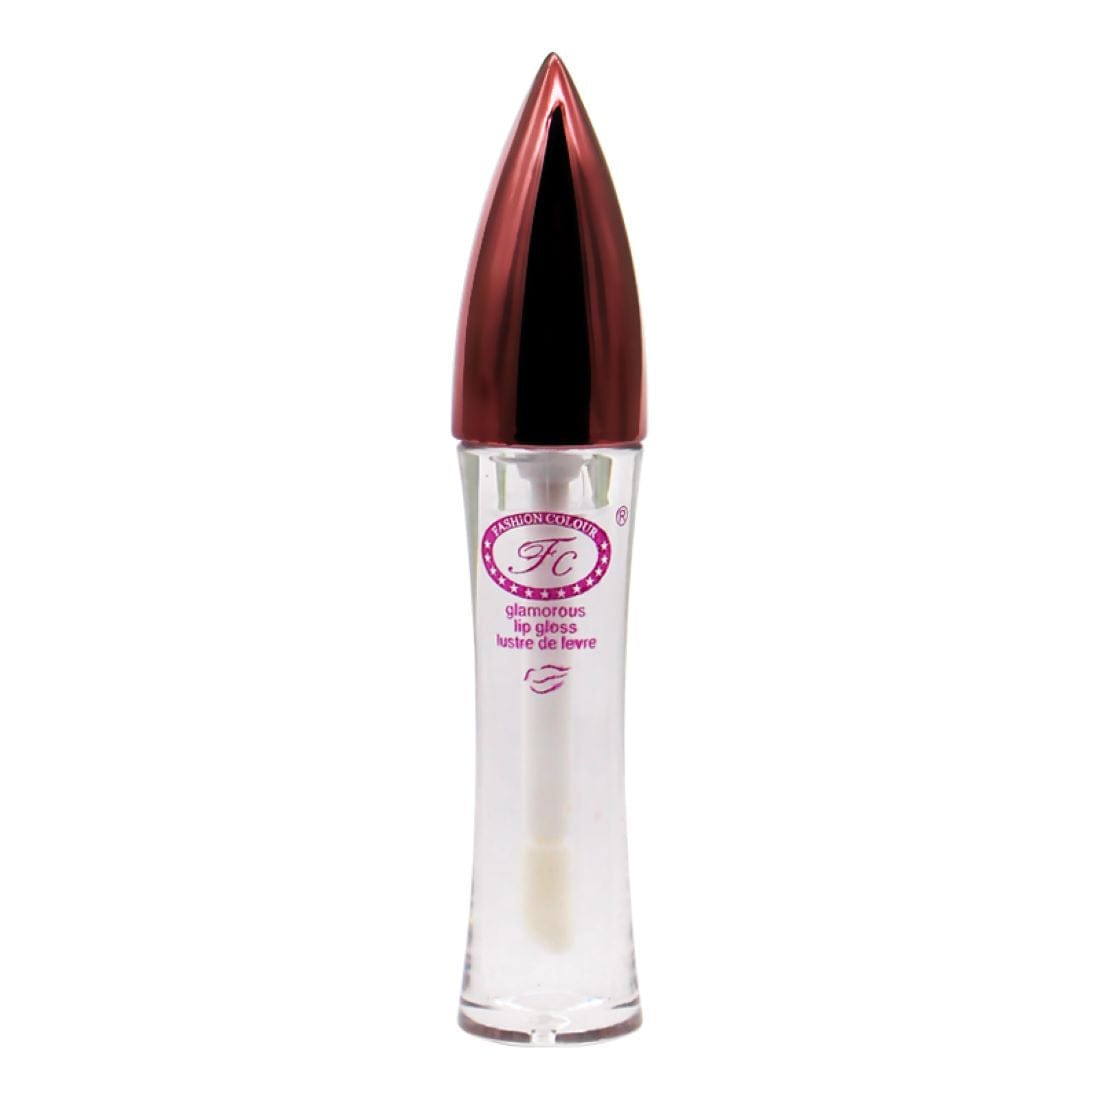 Fashion Colour Lip Gloss comes with a reputation to make you ultra-glam No tackiness and no grittiness, this gloss is all about hi-shine glamour Infused with light-magnifying technology Absolute color purity, Shows Fresh Appearance Makes Lips Soft With Constant Moisturizing.